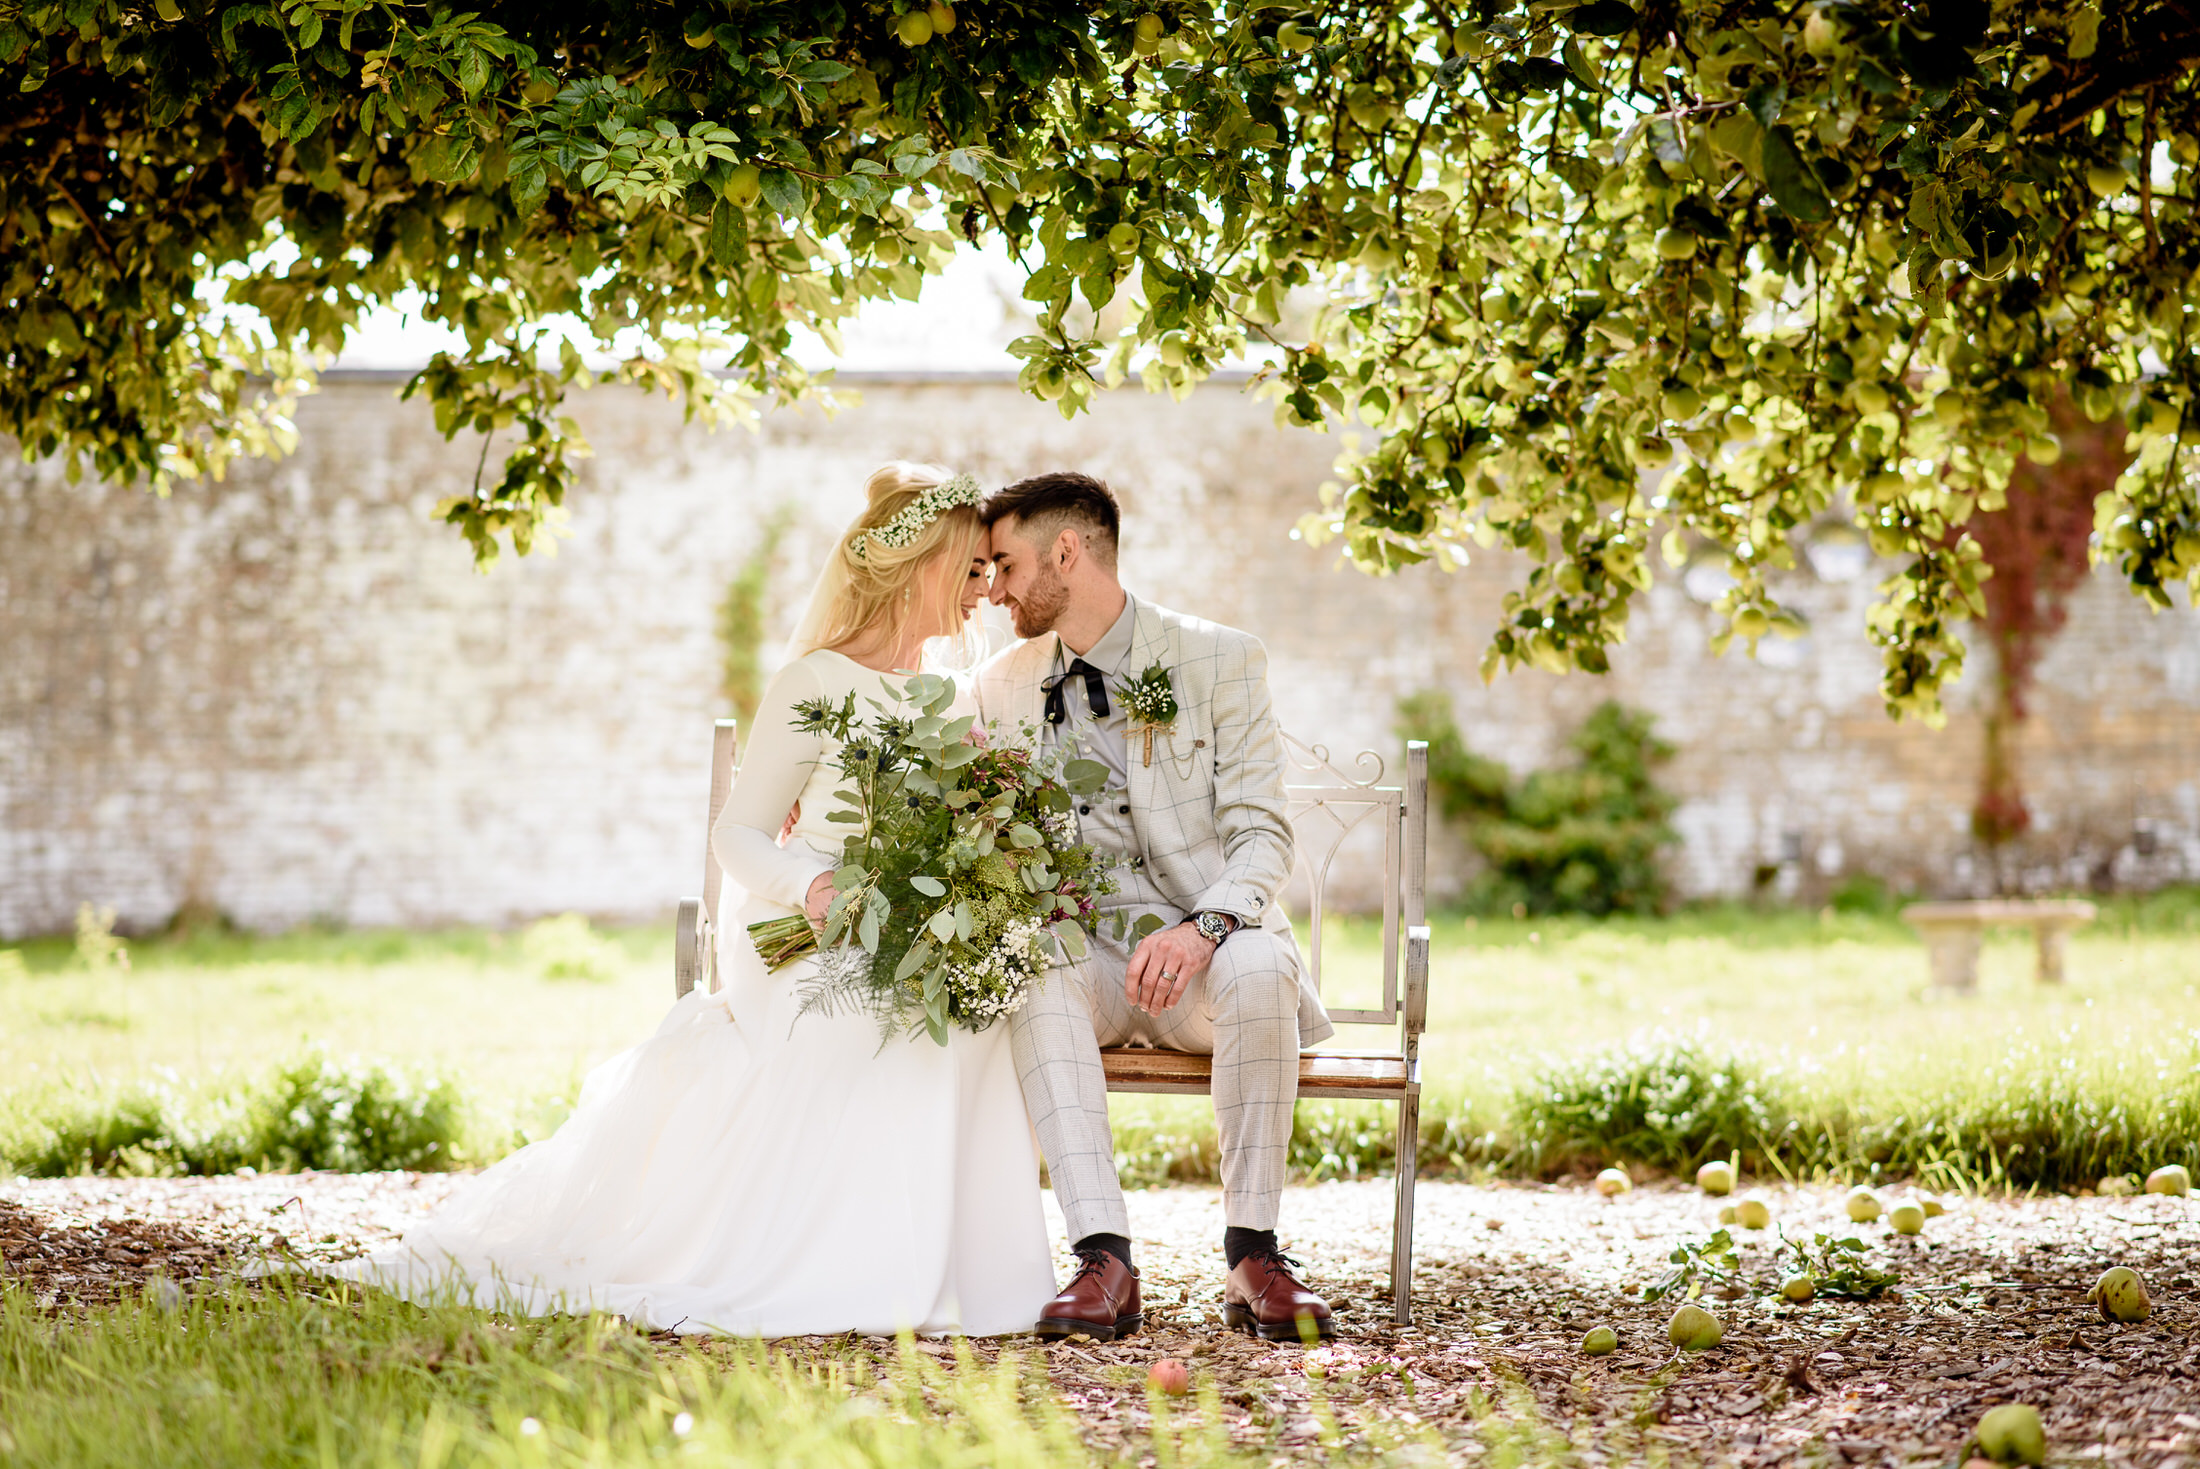 A wedding couple sitting on a bench under an apple tree in the Scrivelsby Walled Garden.